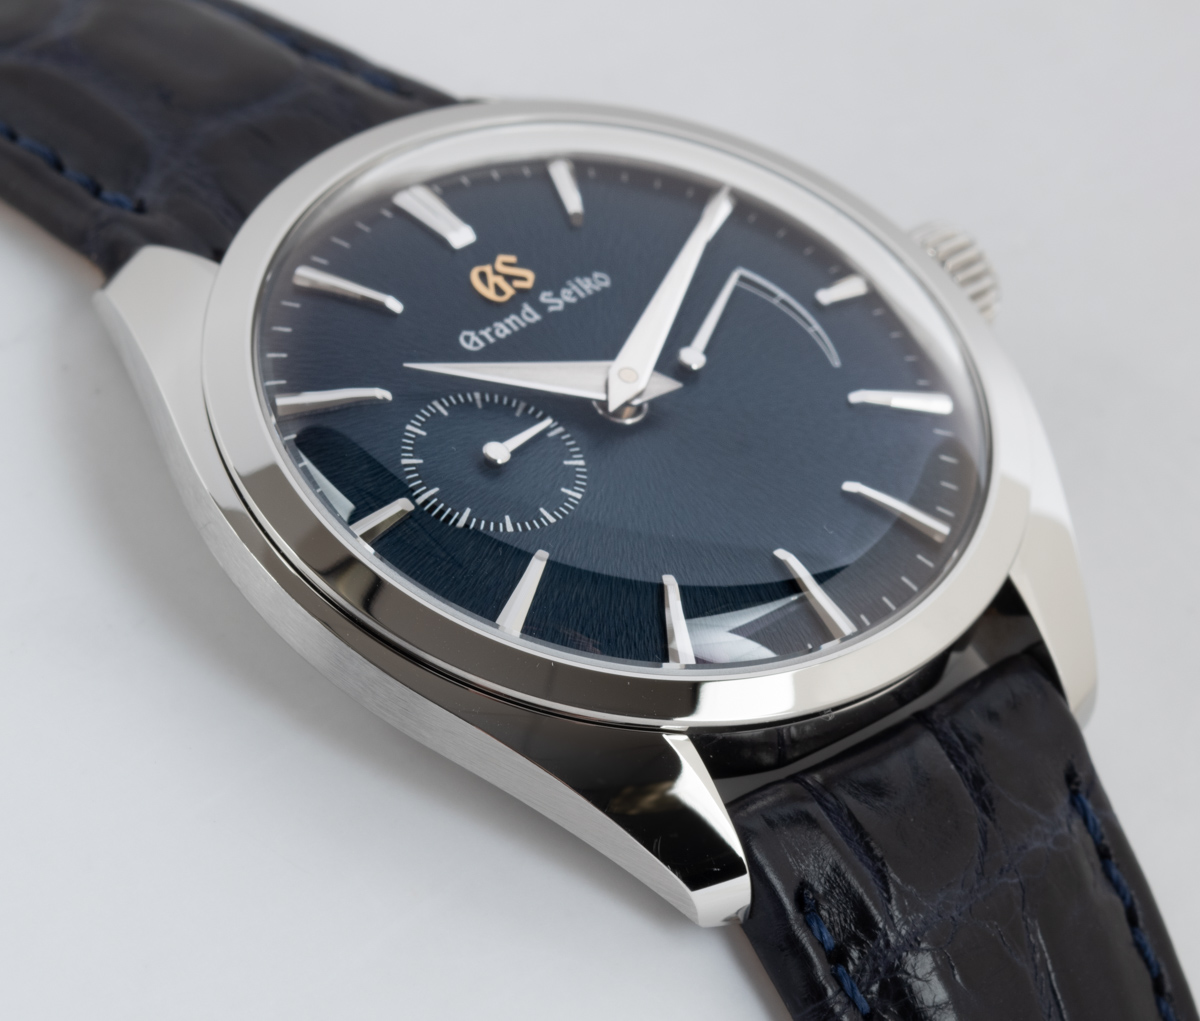 Grand Seiko - Elegance : SBGK005 : SOLD OUT : Mt. Iwate blue dial on blue  crocodile strap